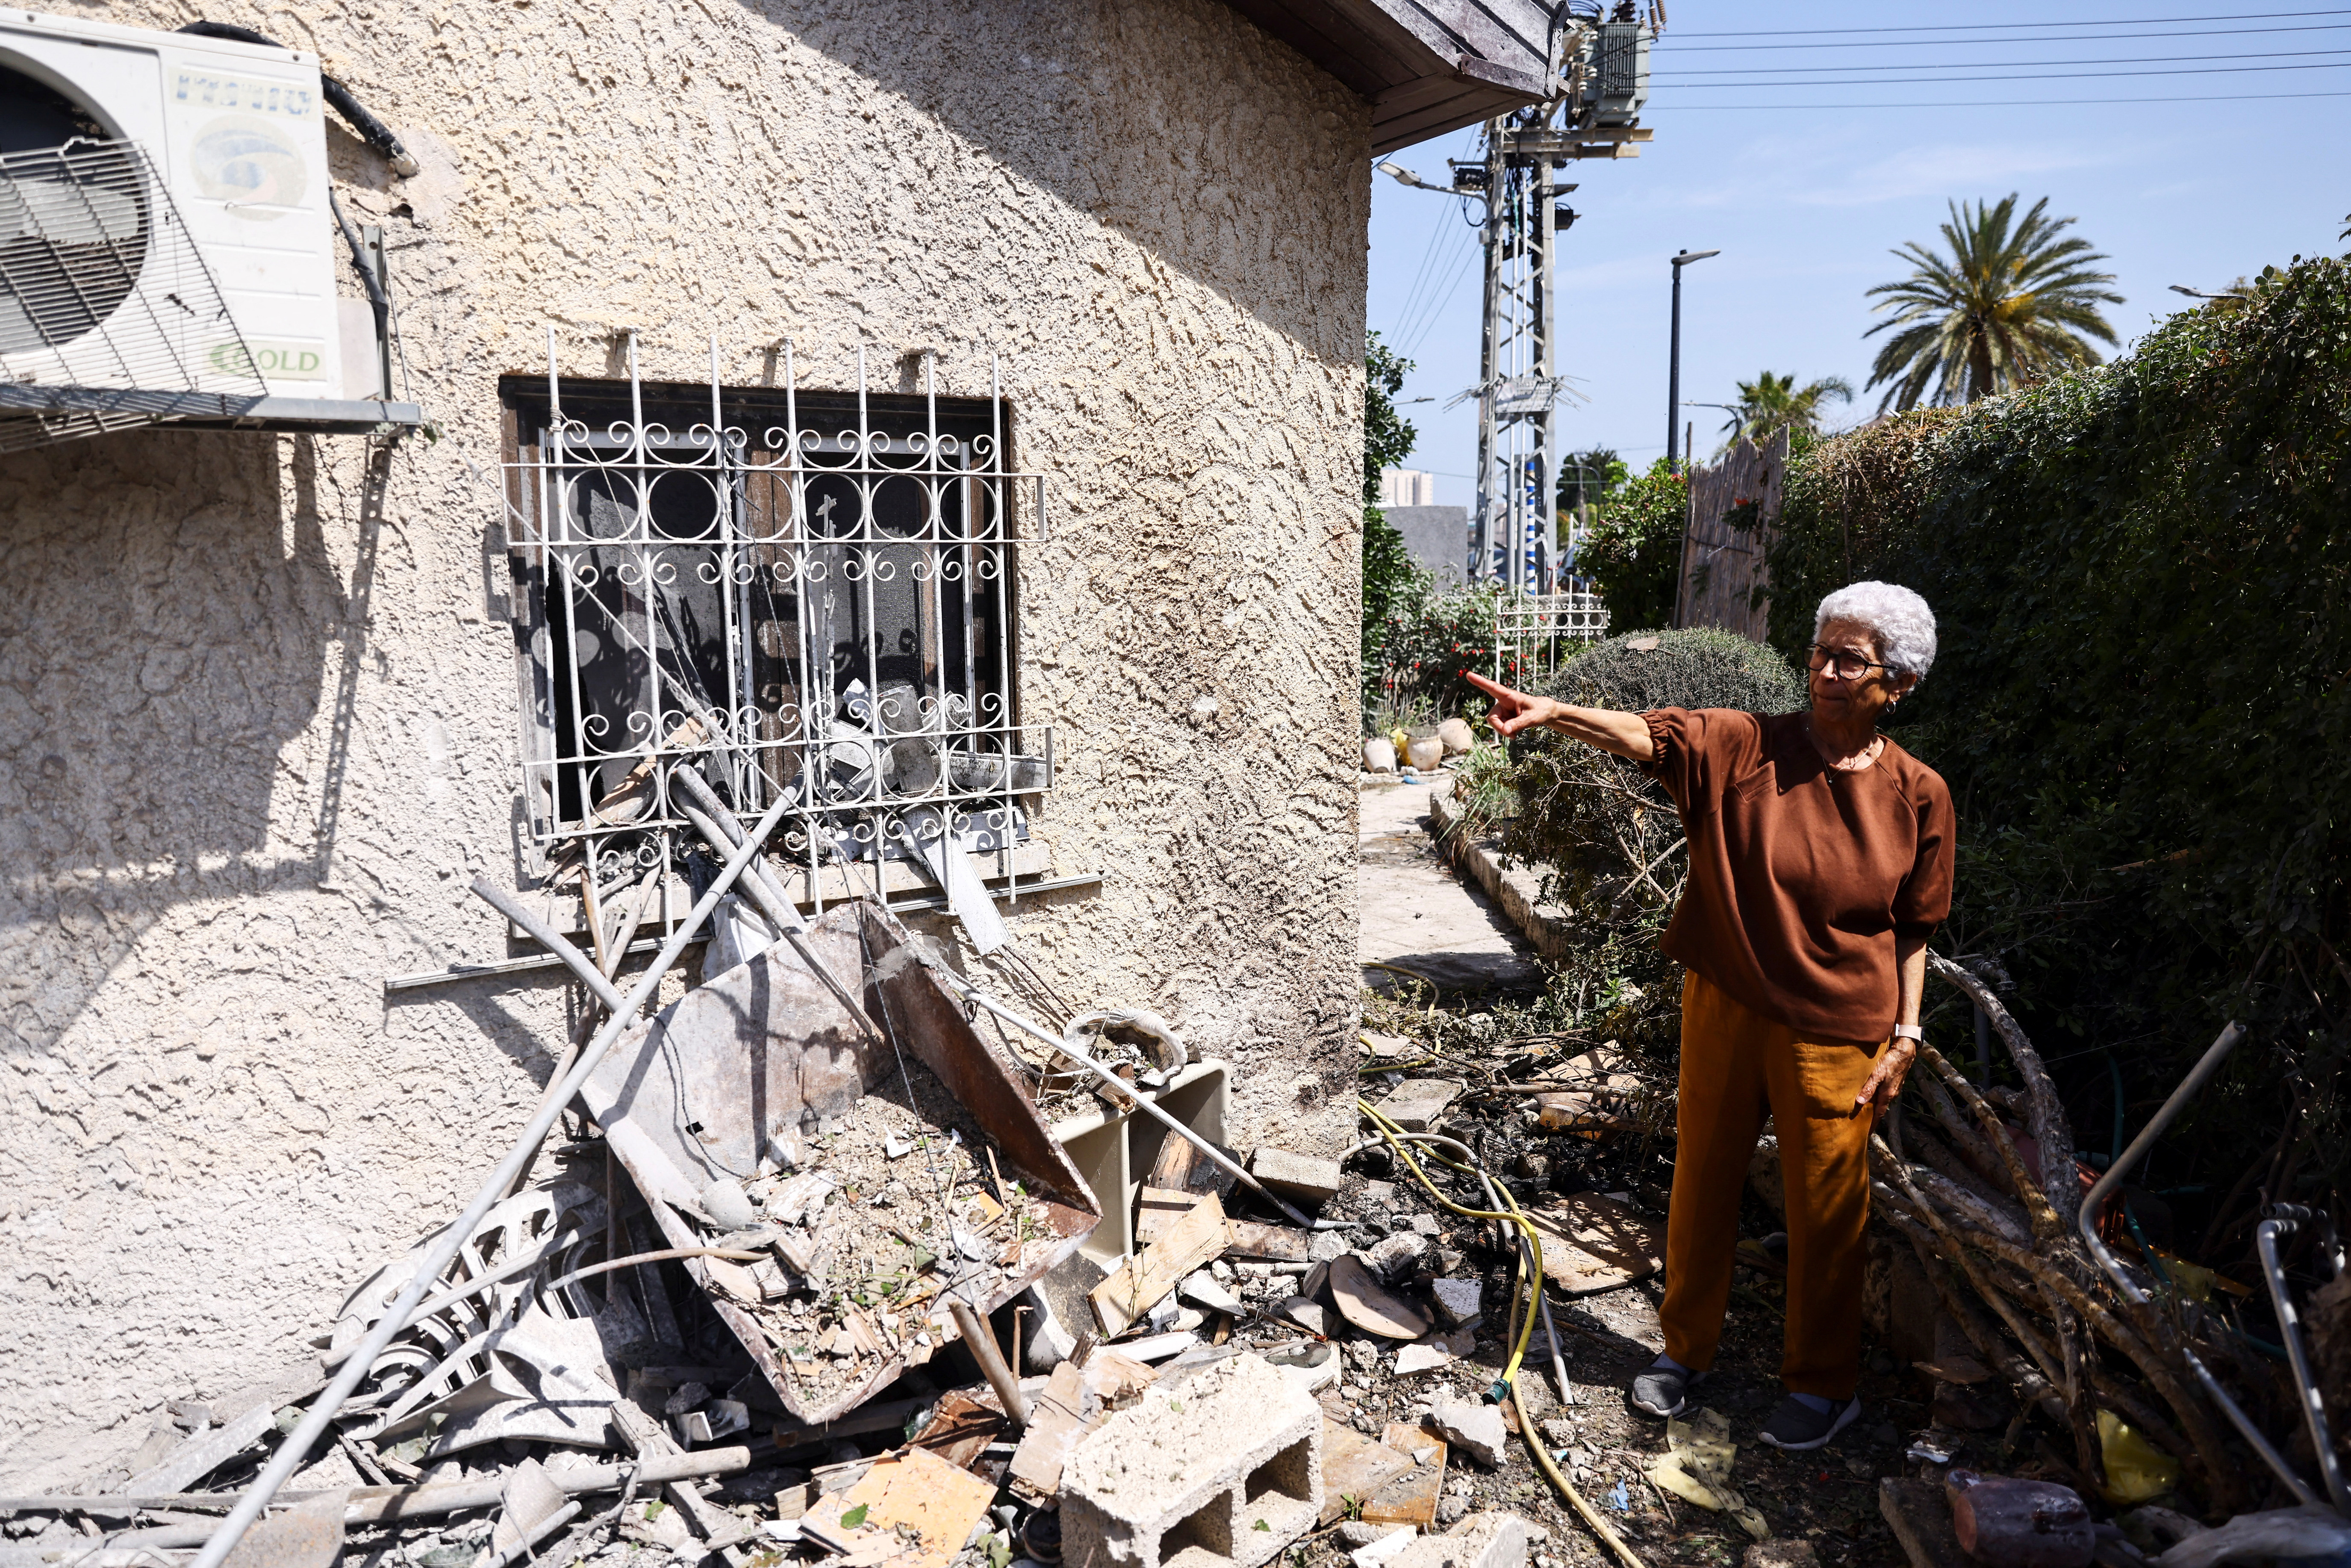 Miriam Karen gestures towards her damaged house which was hit by a rocket from Gaza for the second time in five years, in Ashkelon, southern Israel